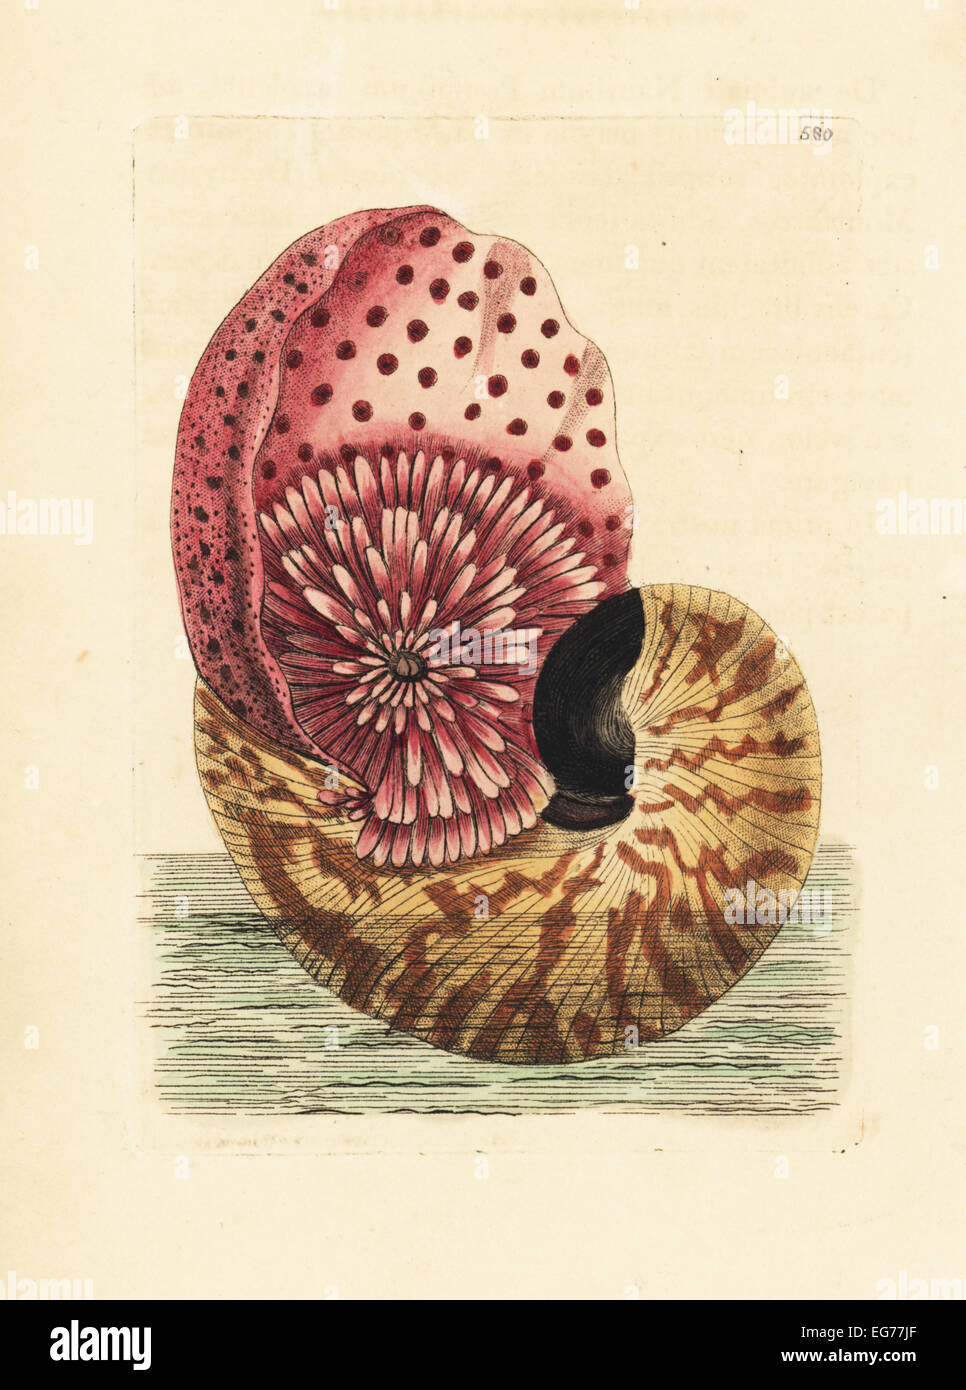 Emperor nautilus cephalopod in its  shell, Nautilus pompilius. Illustration drawn and engraved by Richard Polydore Nodder. Handcoloured copperplate engraving from George Shaw and Frederick Nodder's The Naturalist's Miscellany, London, 1802. Stock Photo